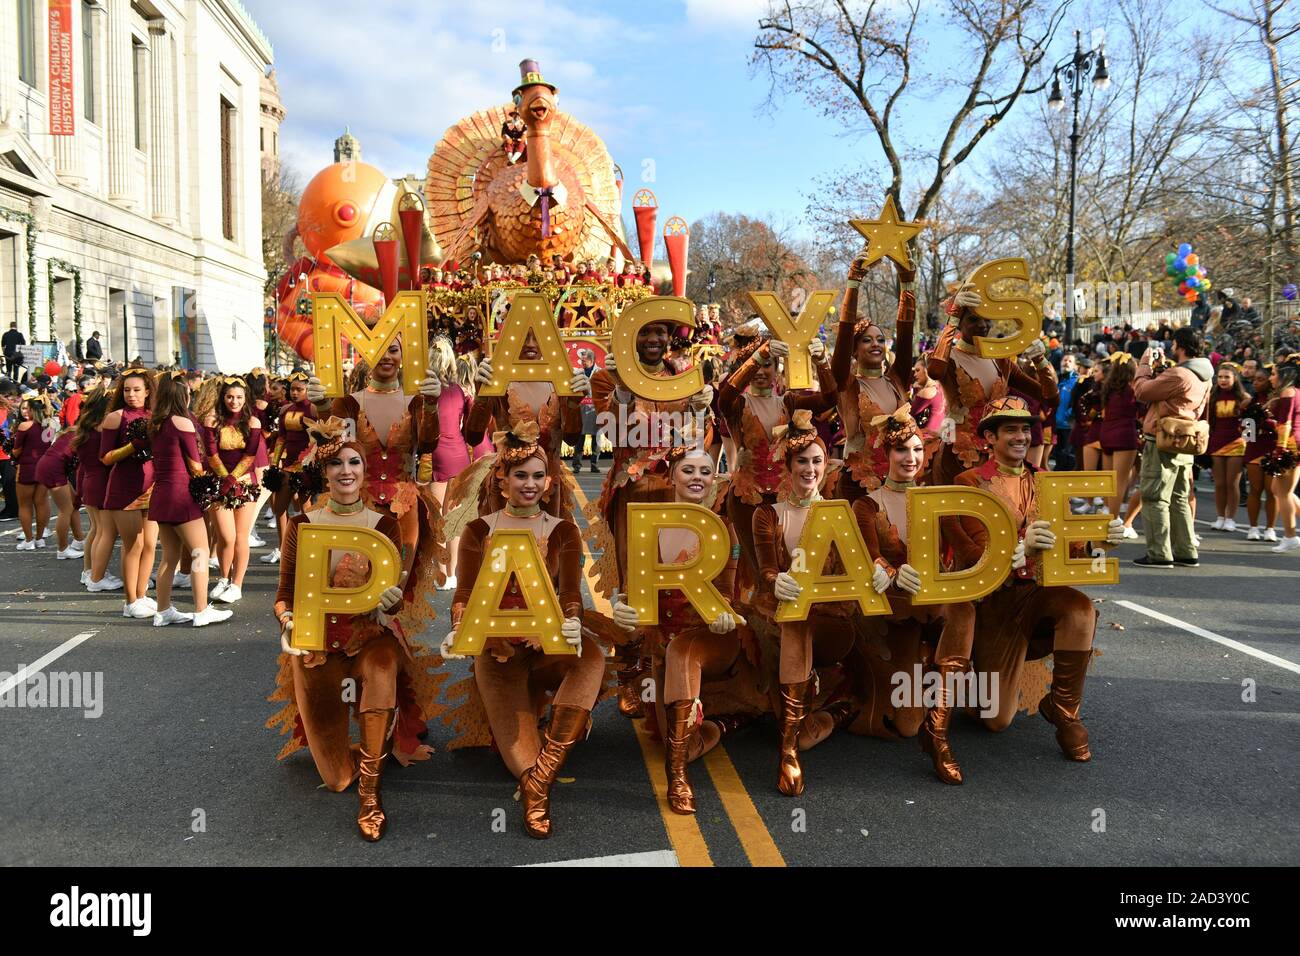 Participants in the 93rd Annual Macy's Thanksgiving Day Parade, New York, USA - 28 Nov 2019 Stock Photo